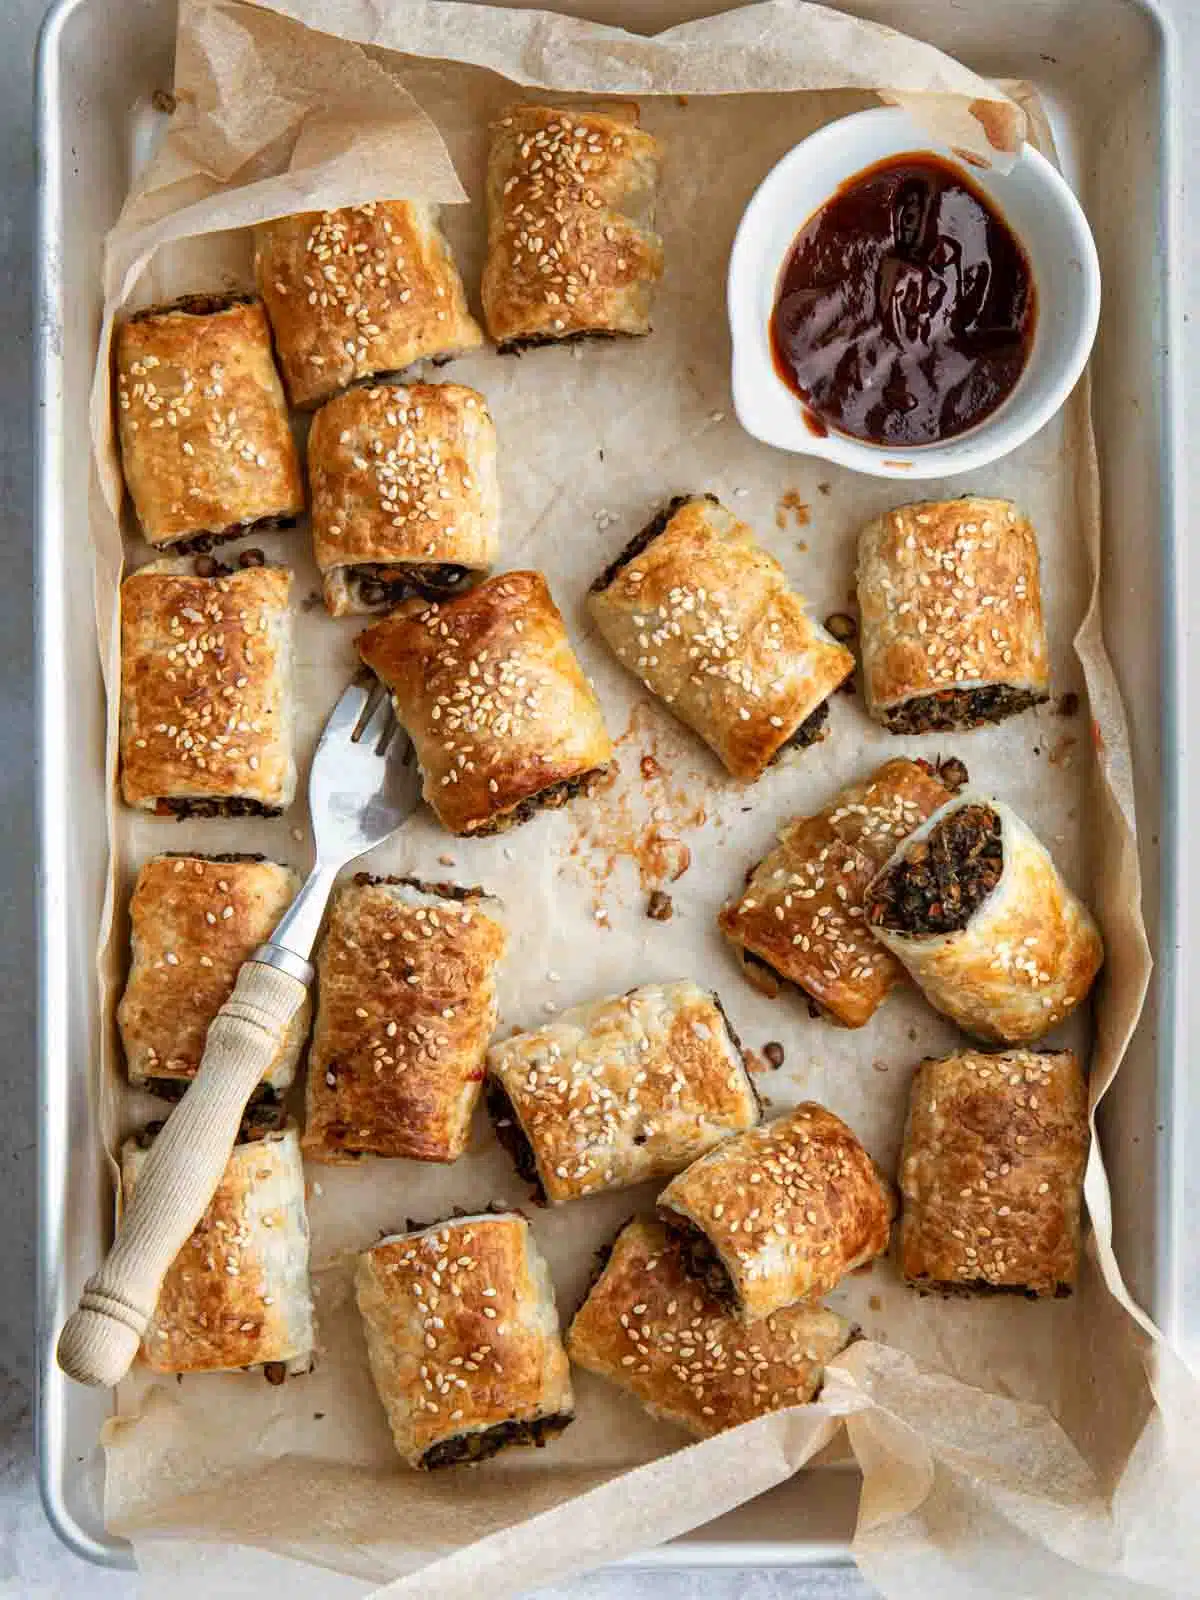 A tray of sausage rolls with sauce.